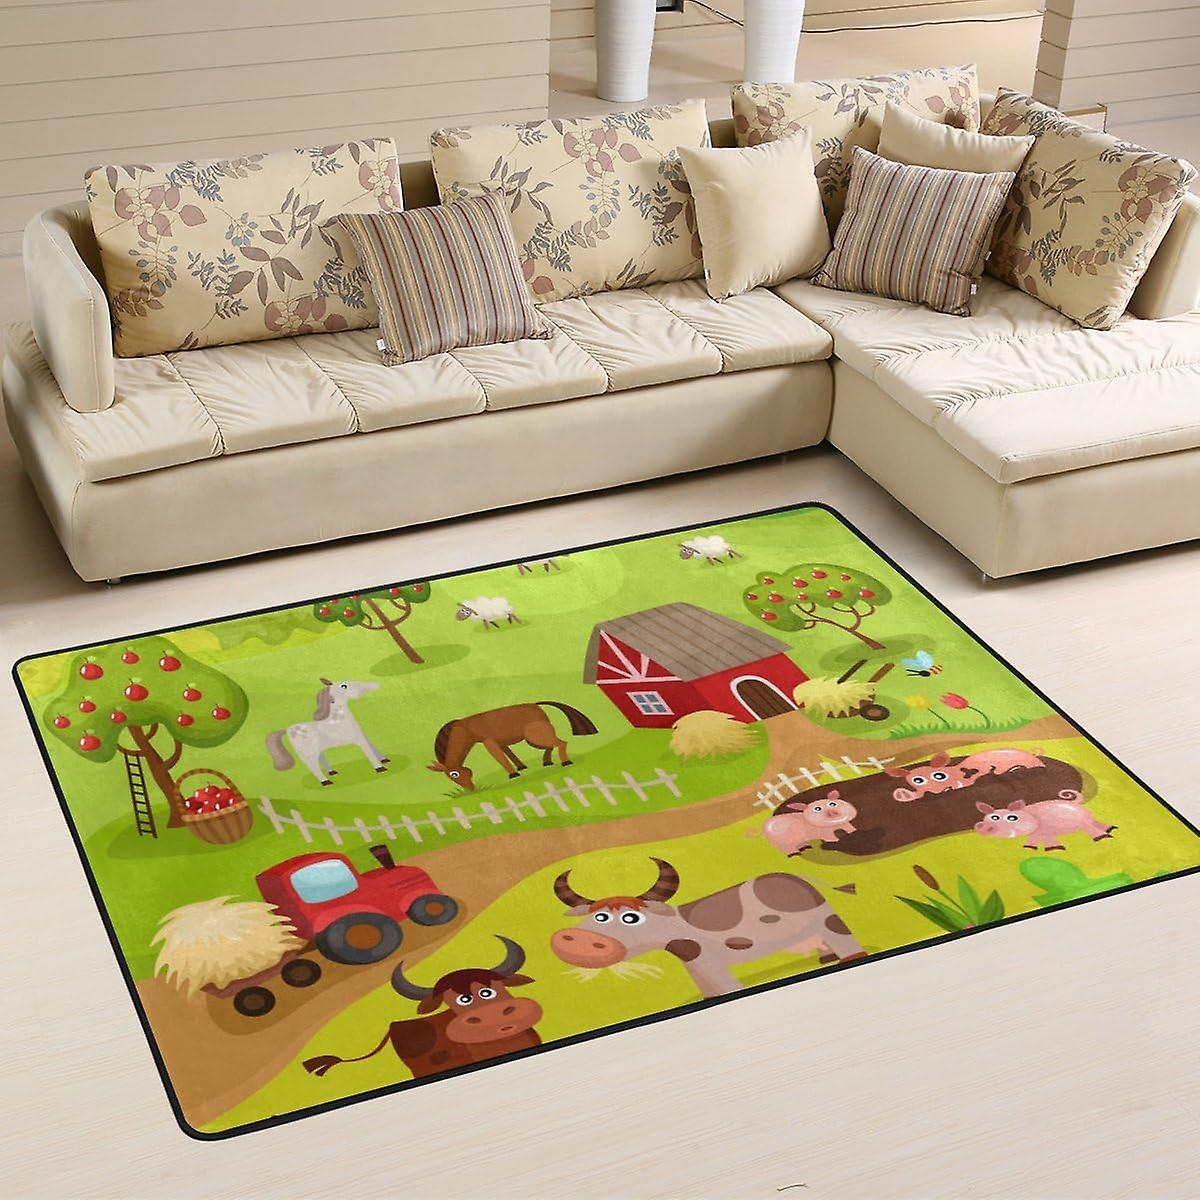 Colourlife Animals In Farm Lightweight Carpet Mats Area Soft Rugs Floor Mat Doormat Decoration For Rooms Entrance 36 X 24 Inches